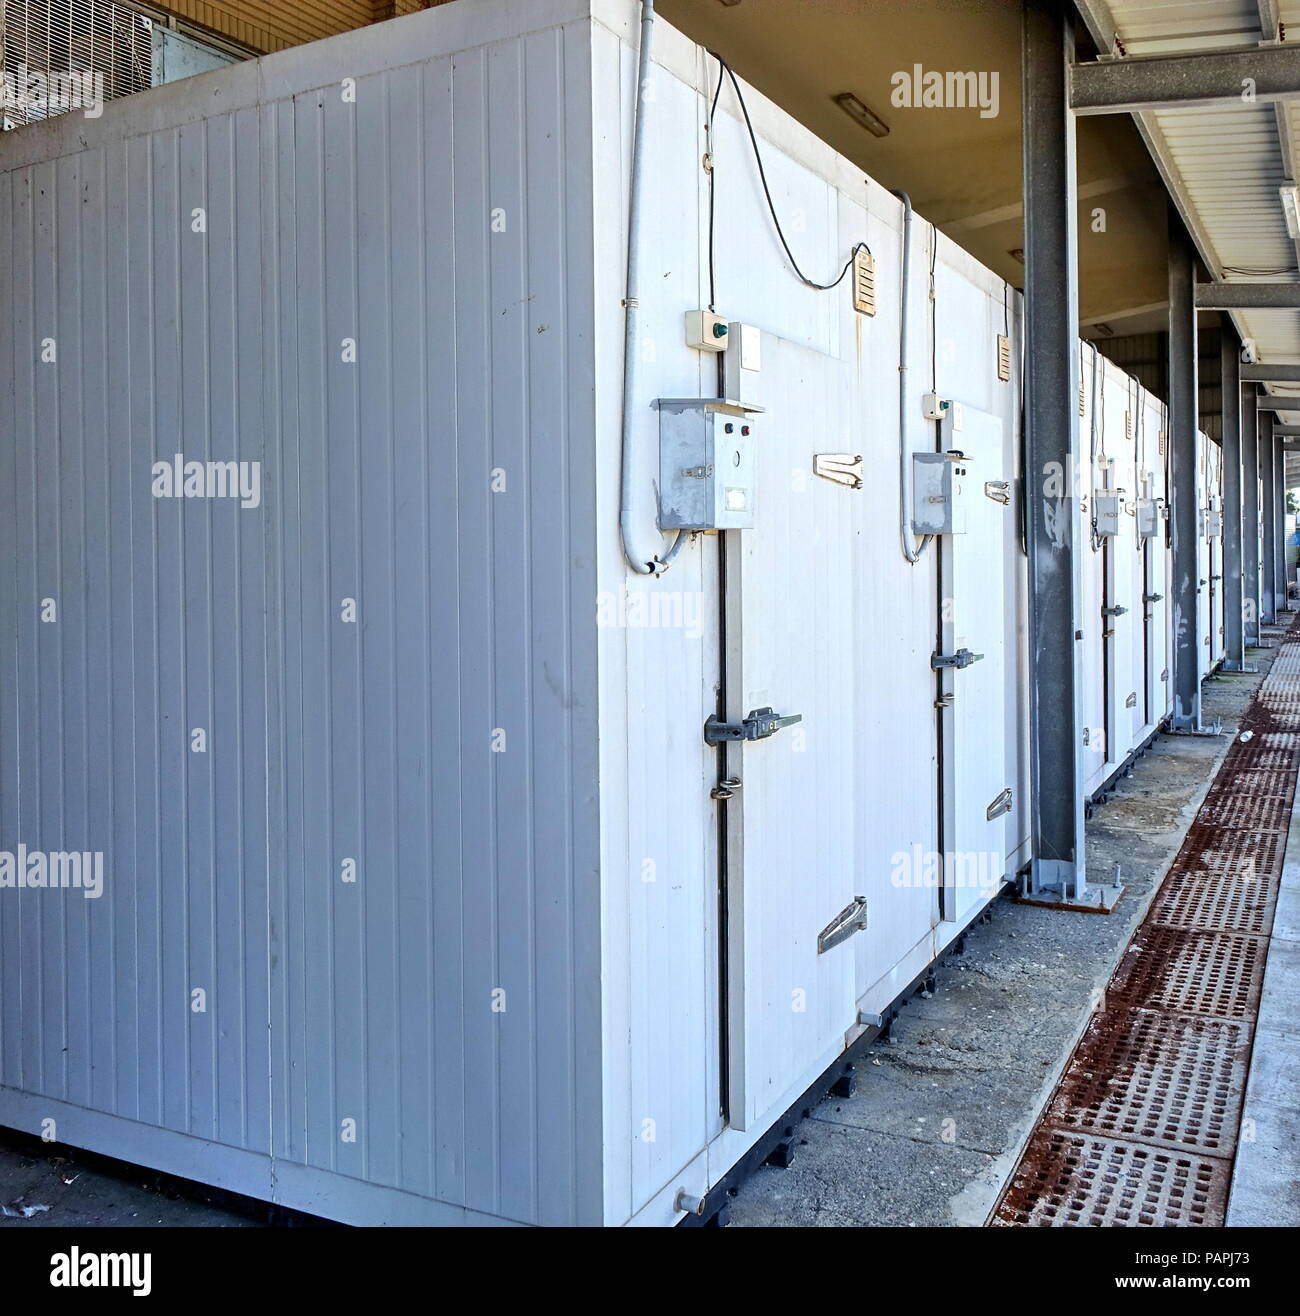 A row of walk-in refrigerators and freezer at a commercial cold storage facility Stock Photo